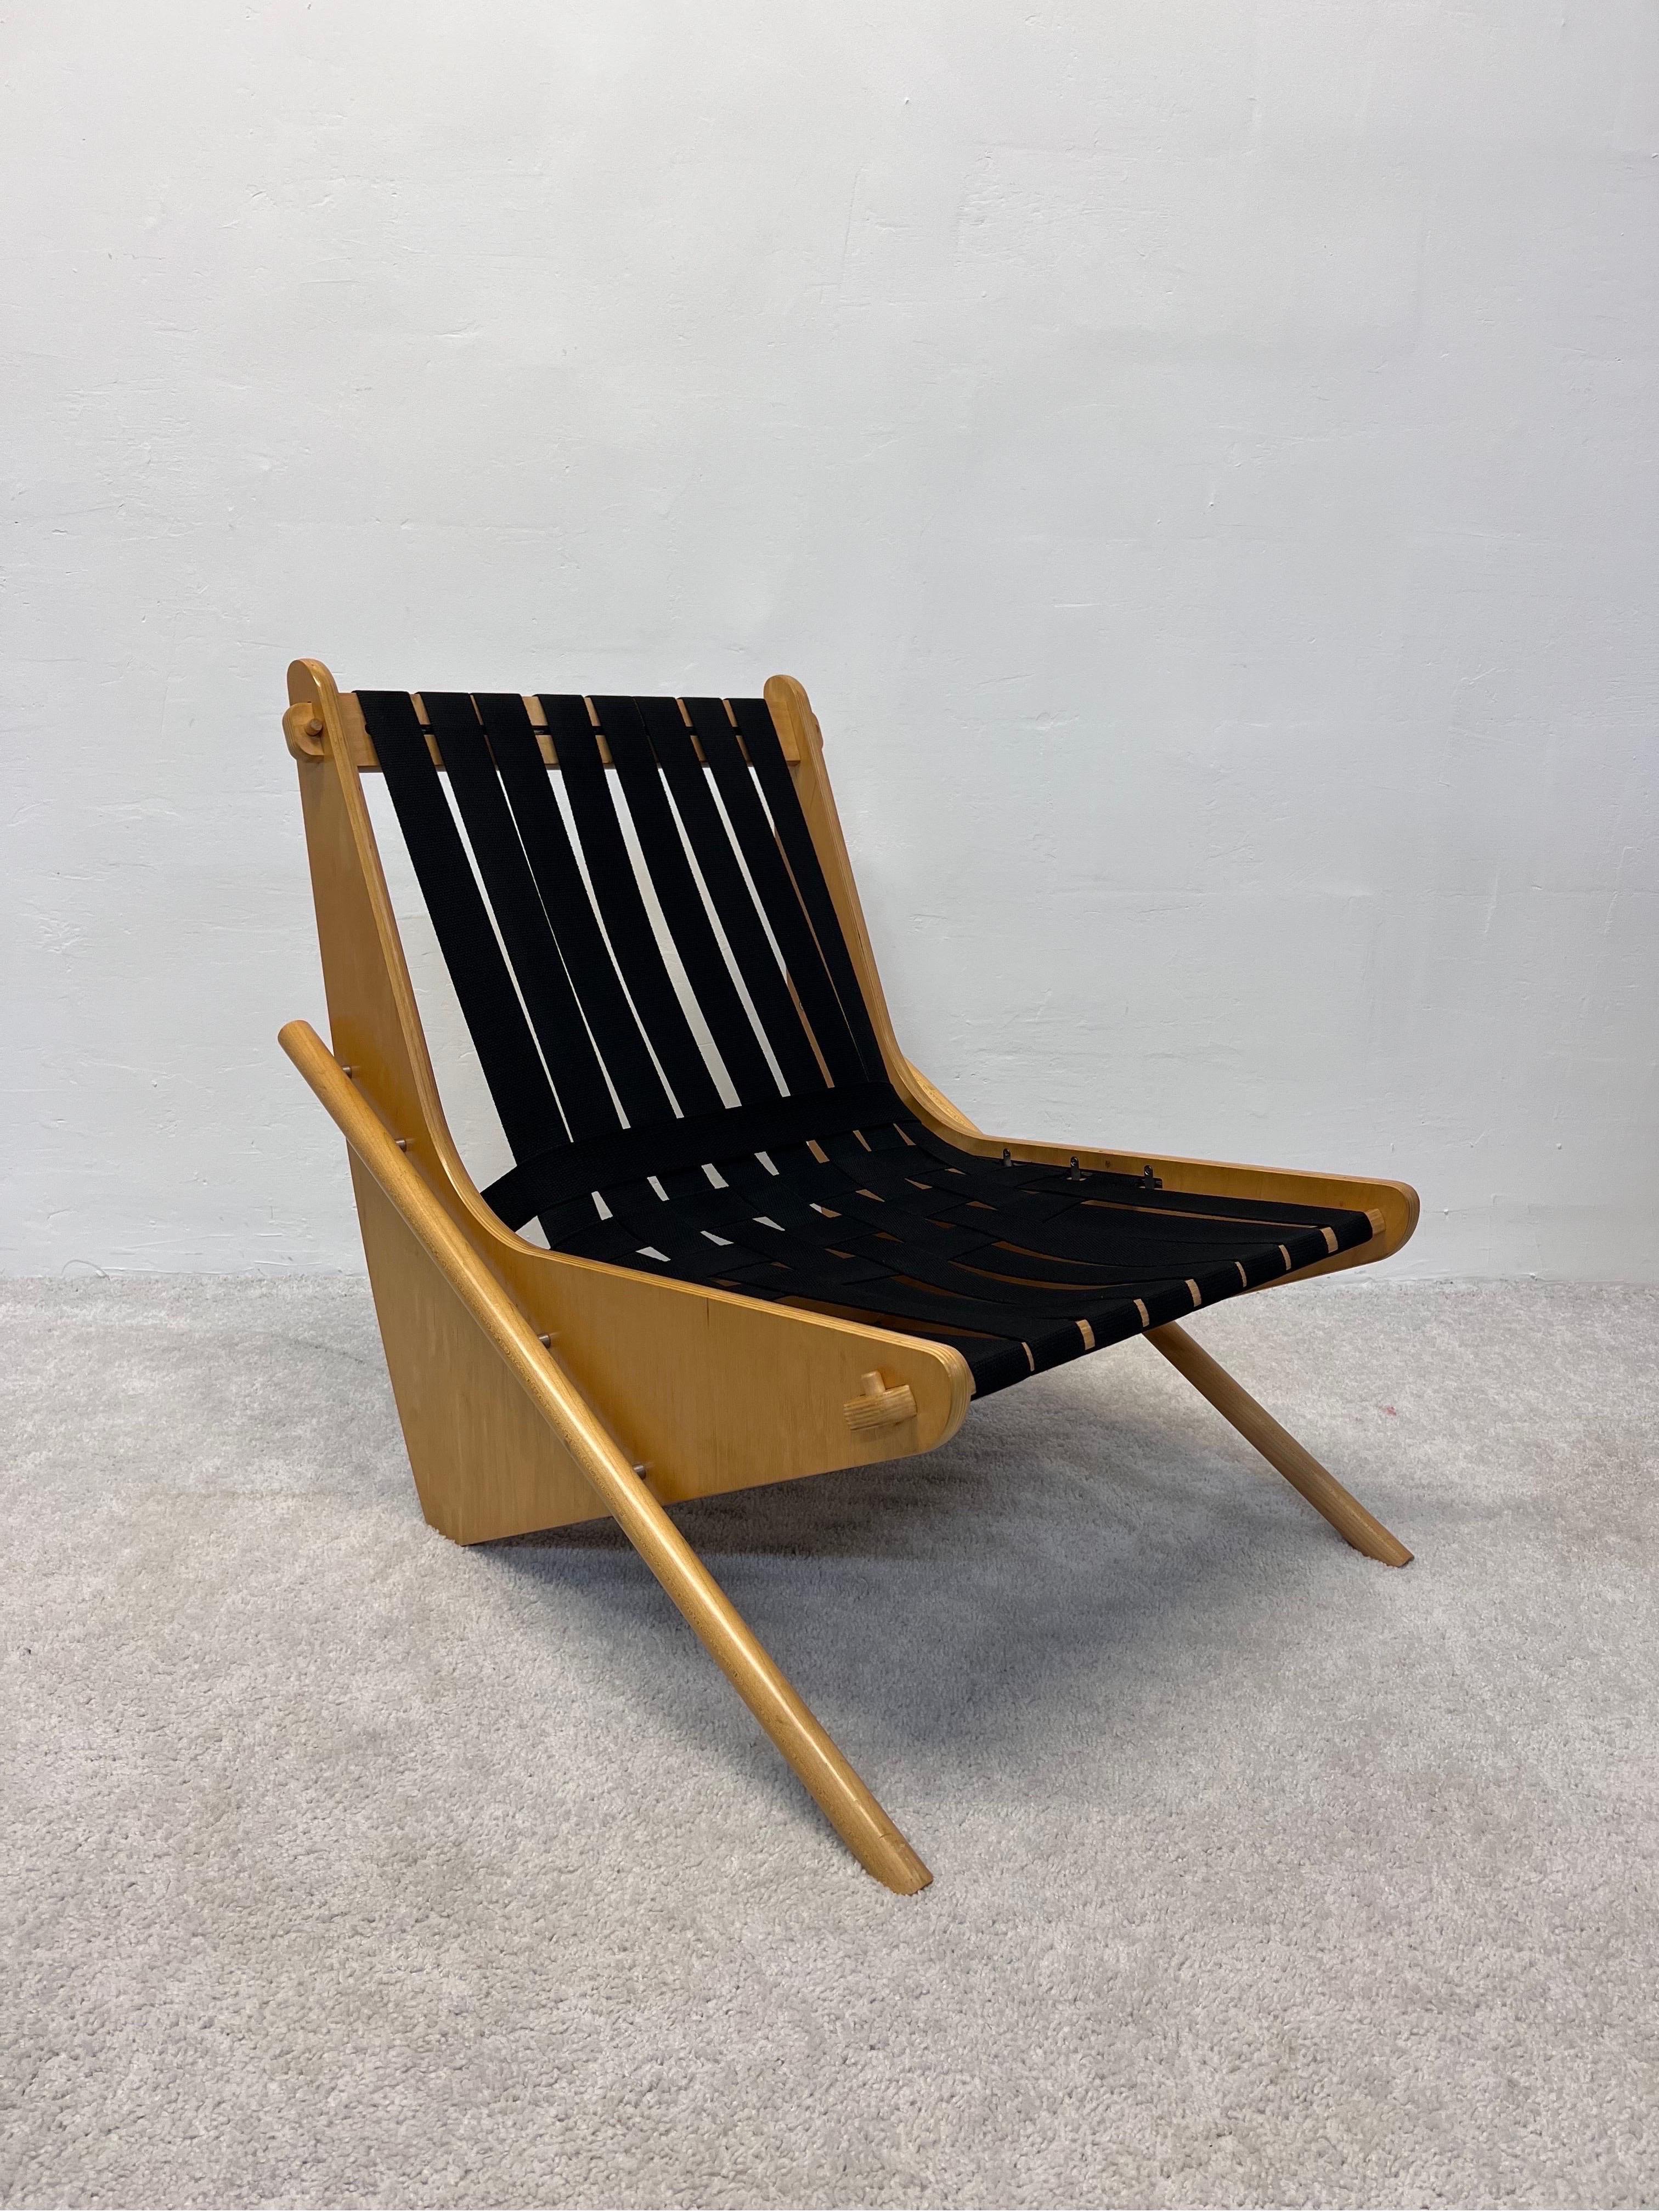 American Richard Neutra Boomerang Lounge Chair by House of Industries and Otto Design #56